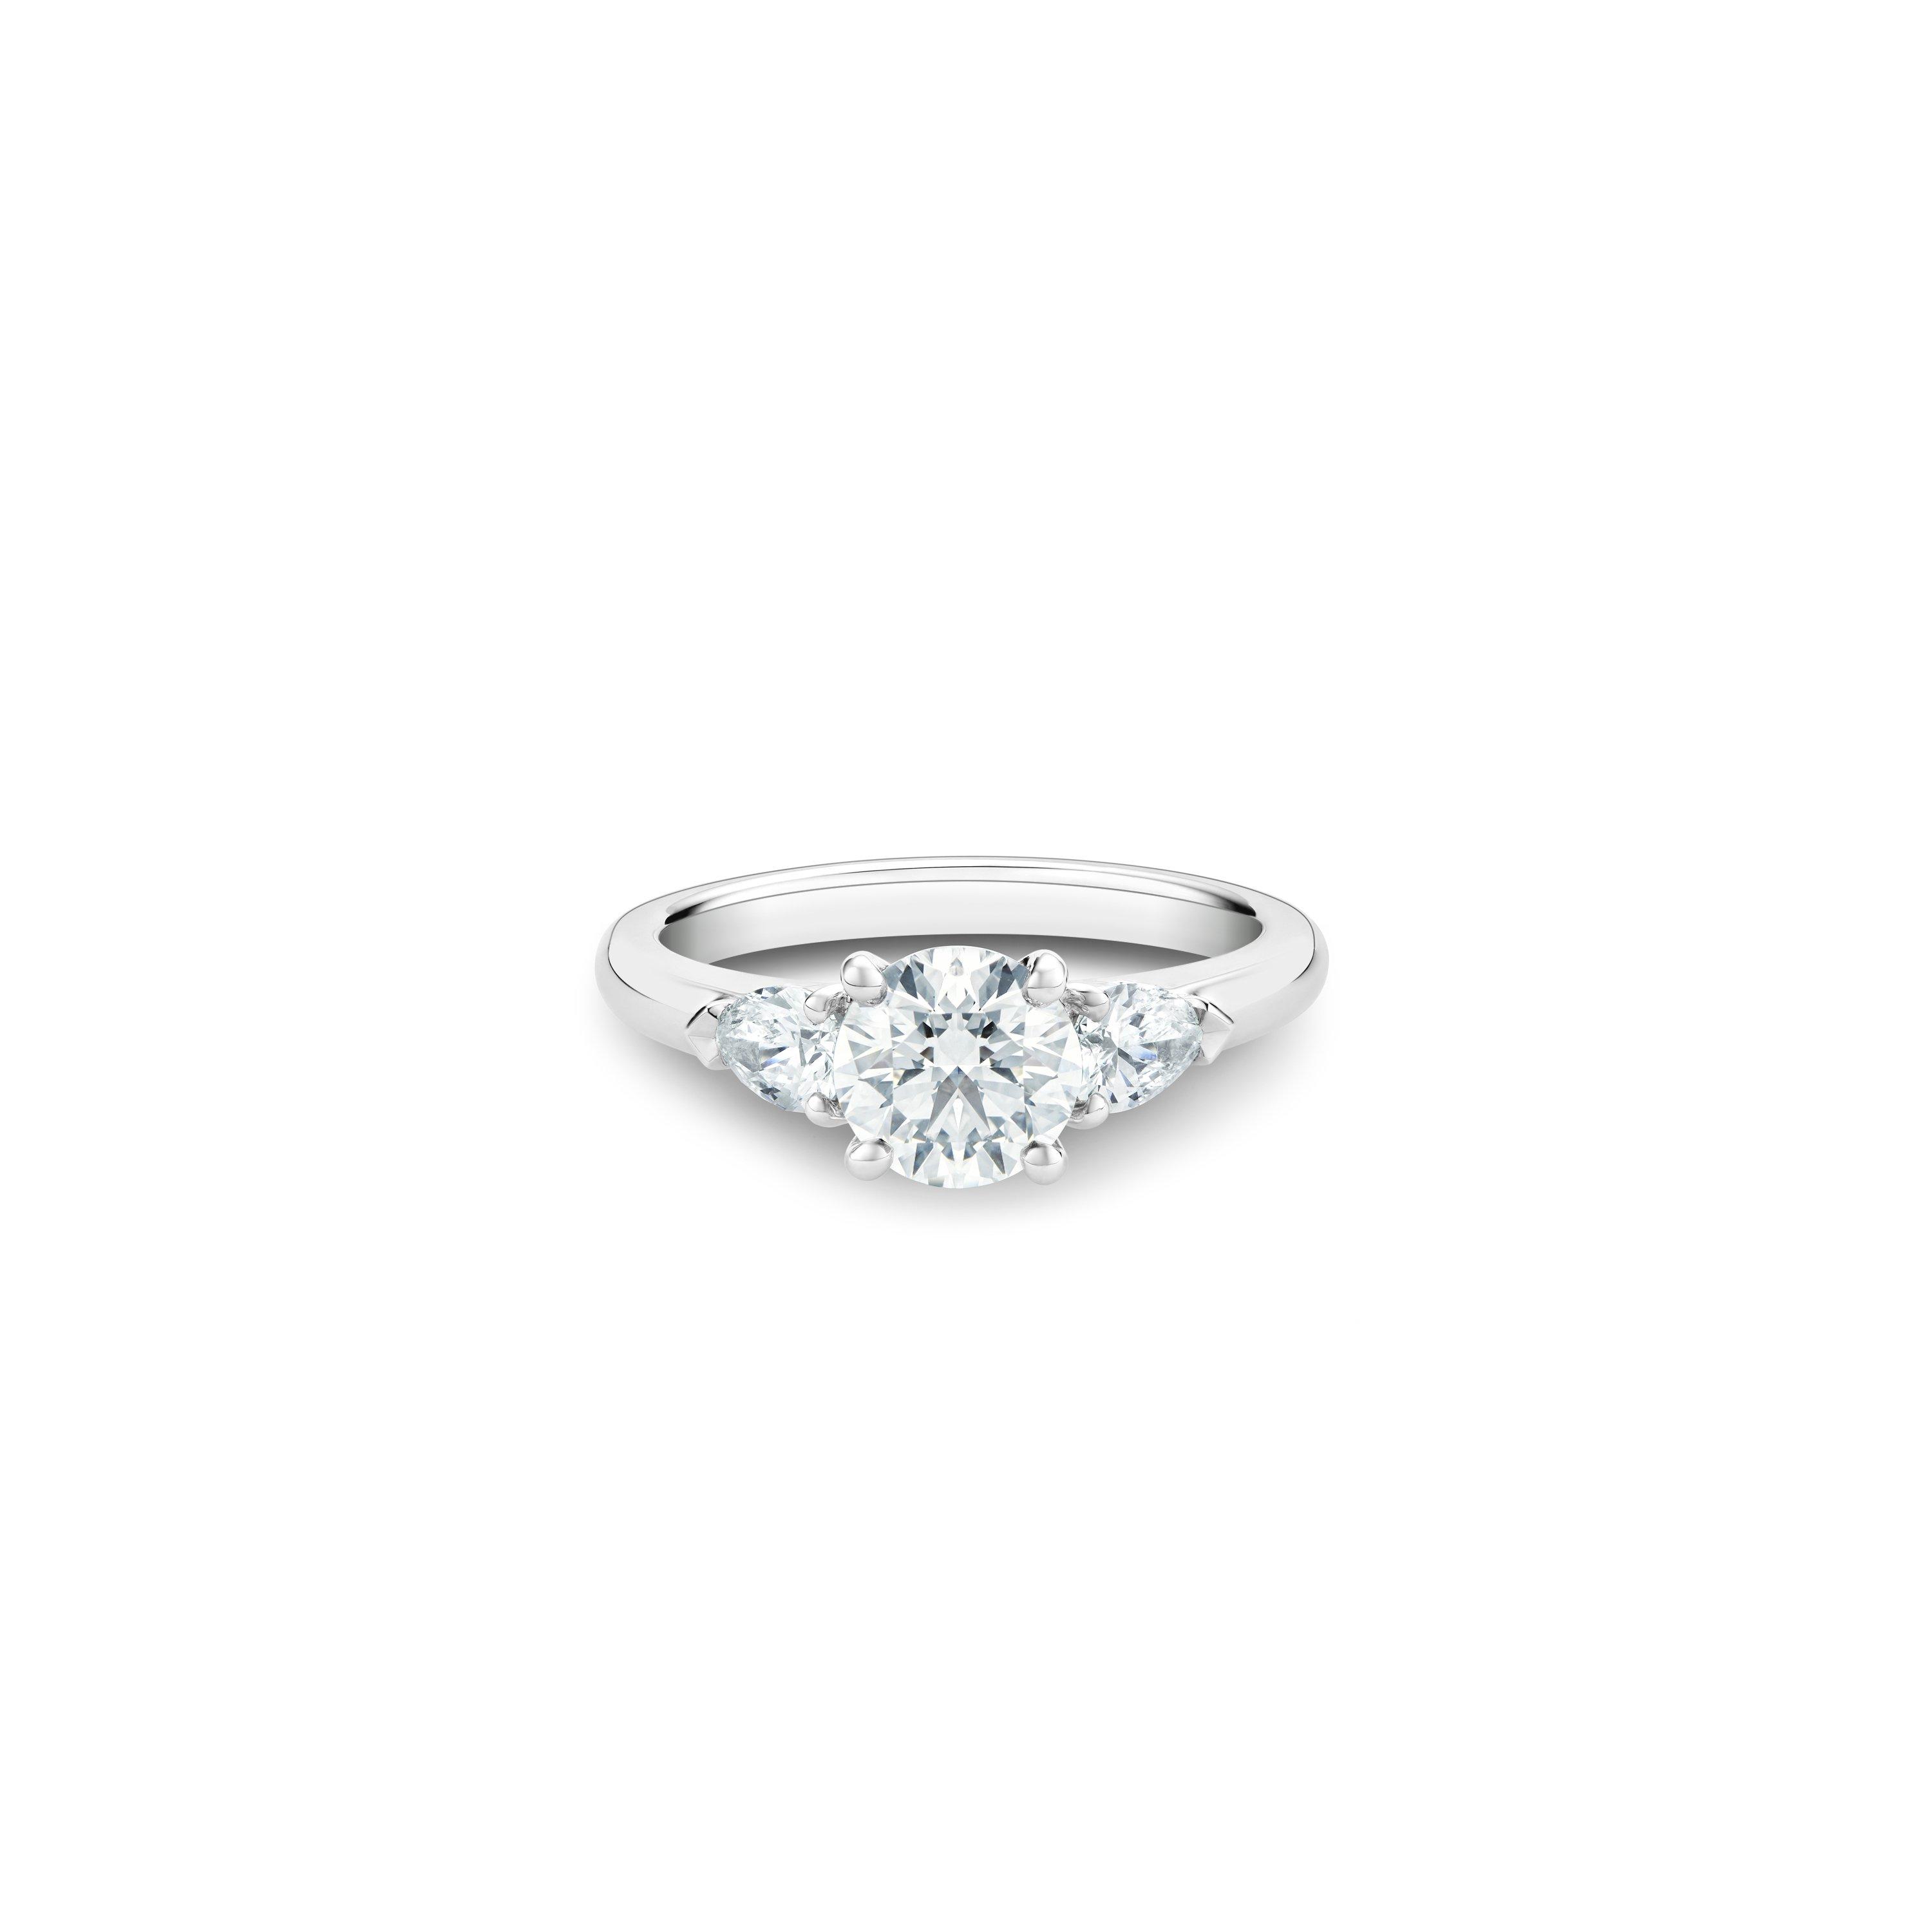 Debeers Db Classic Round Brilliant And Pear-shaped Diamond Ring In White